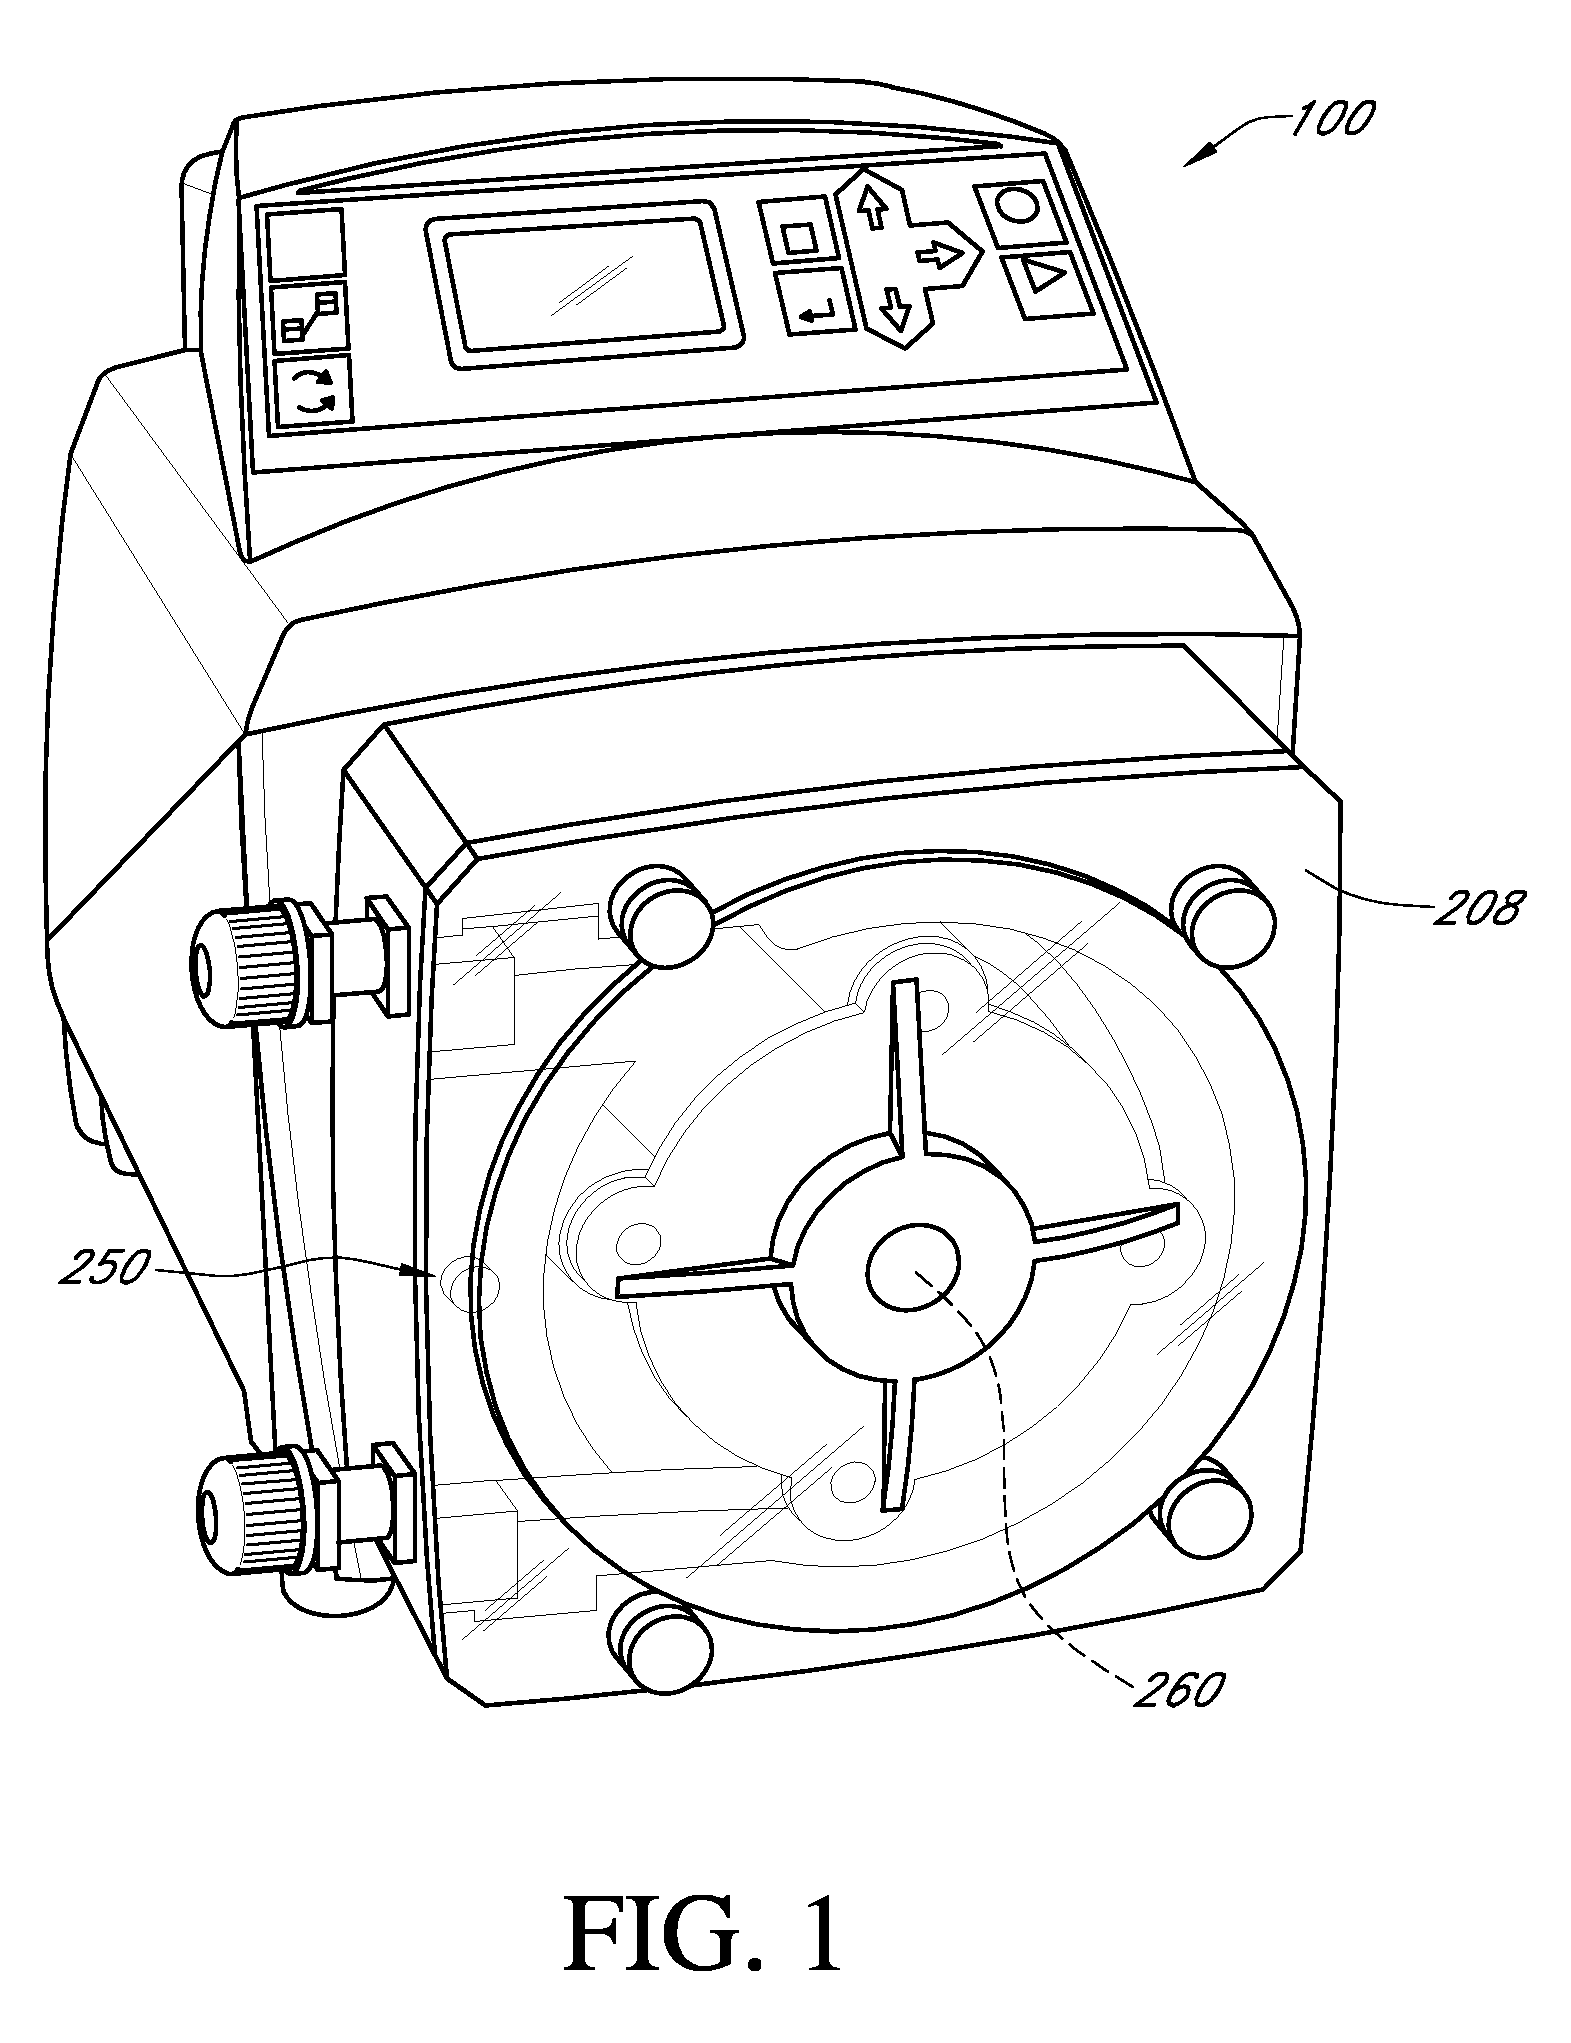 Safety switch on a peristaltic pump